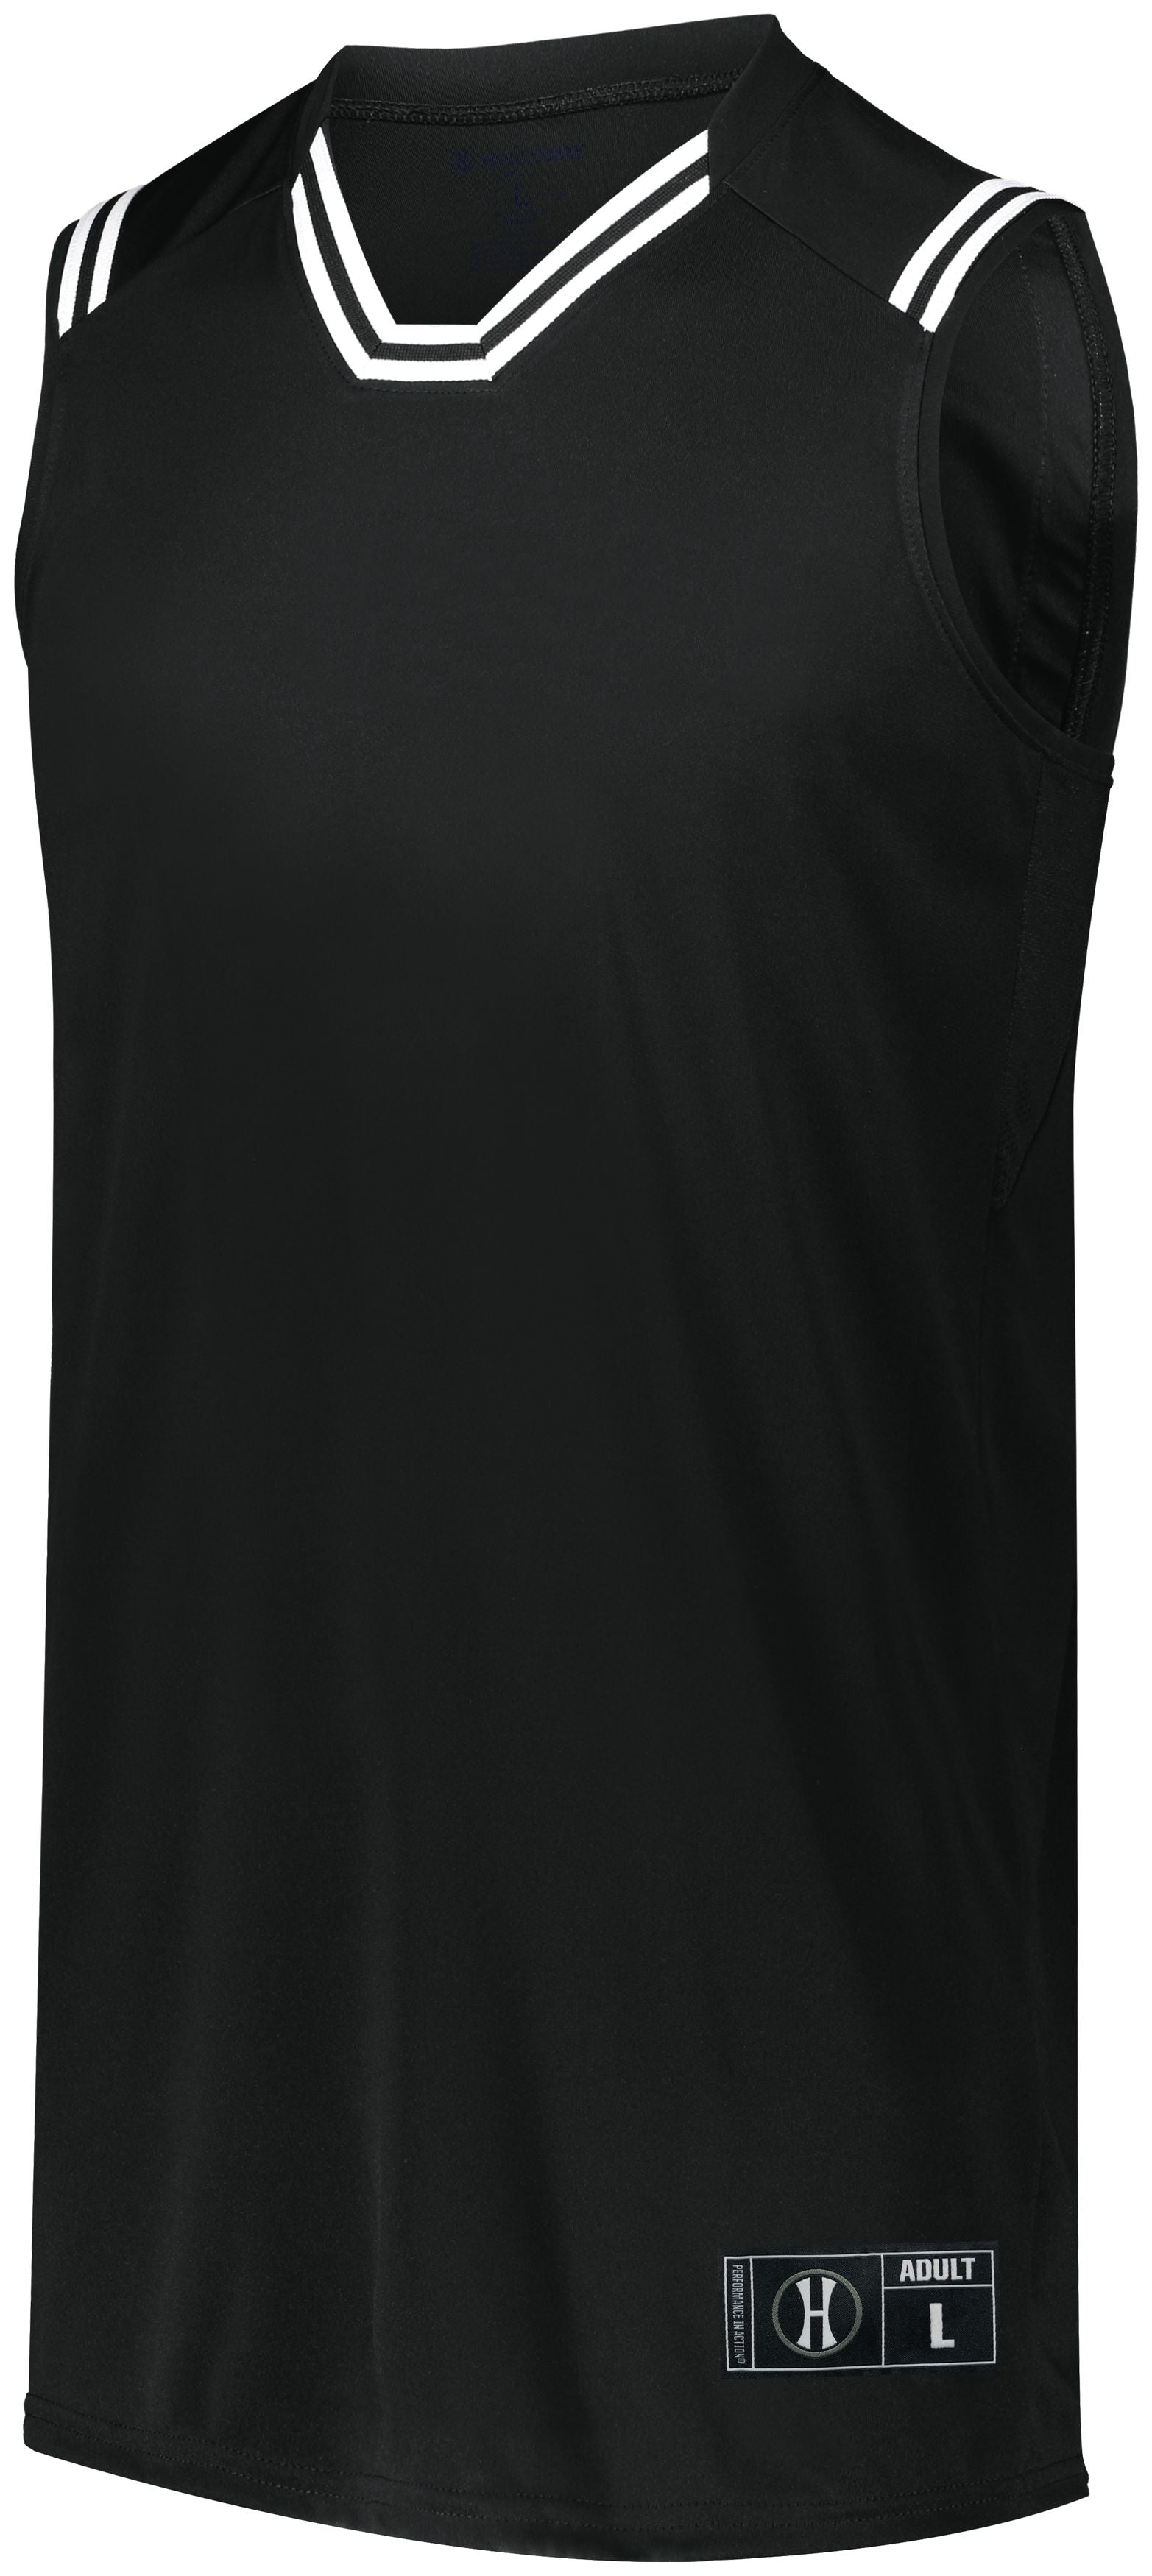 Holloway Retro Basketball Jersey in Black/White  -Part of the Adult, Adult-Jersey, Basketball, Holloway, Shirts, All-Sports, All-Sports-1 product lines at KanaleyCreations.com